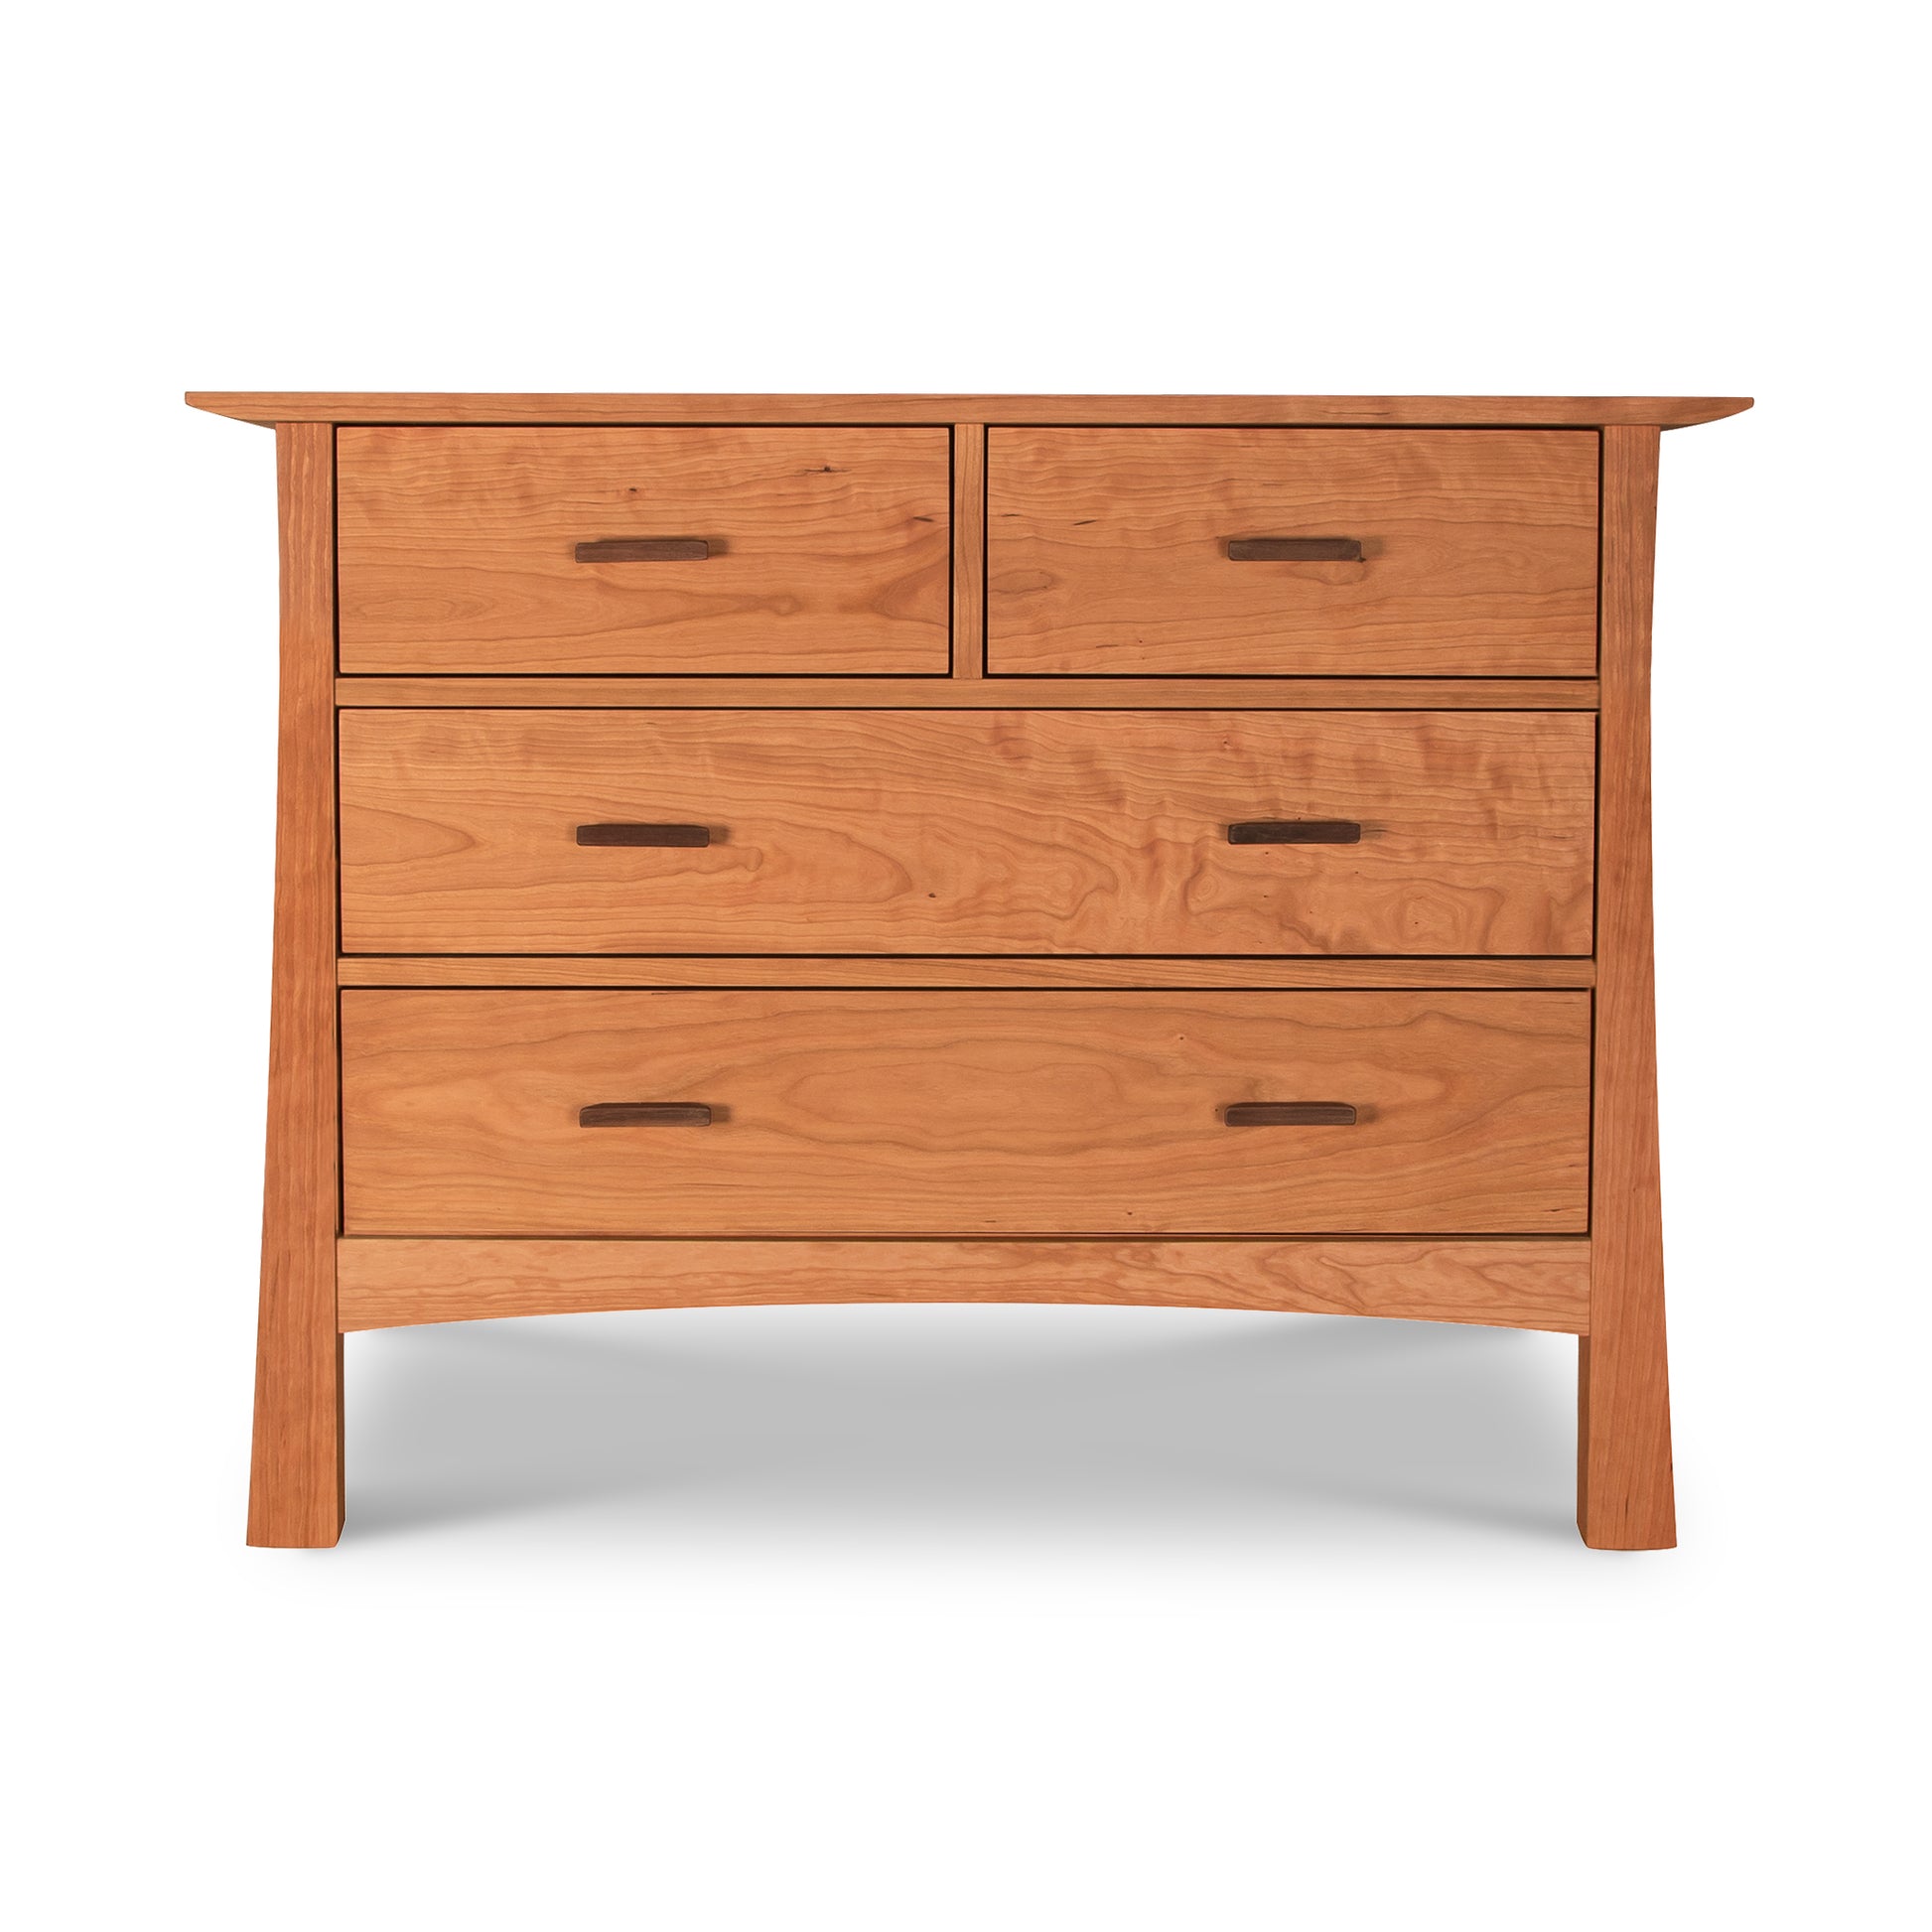 A Vermont Furniture Designs Contemporary Craftsman 4-Drawer Chest isolated on a white background.